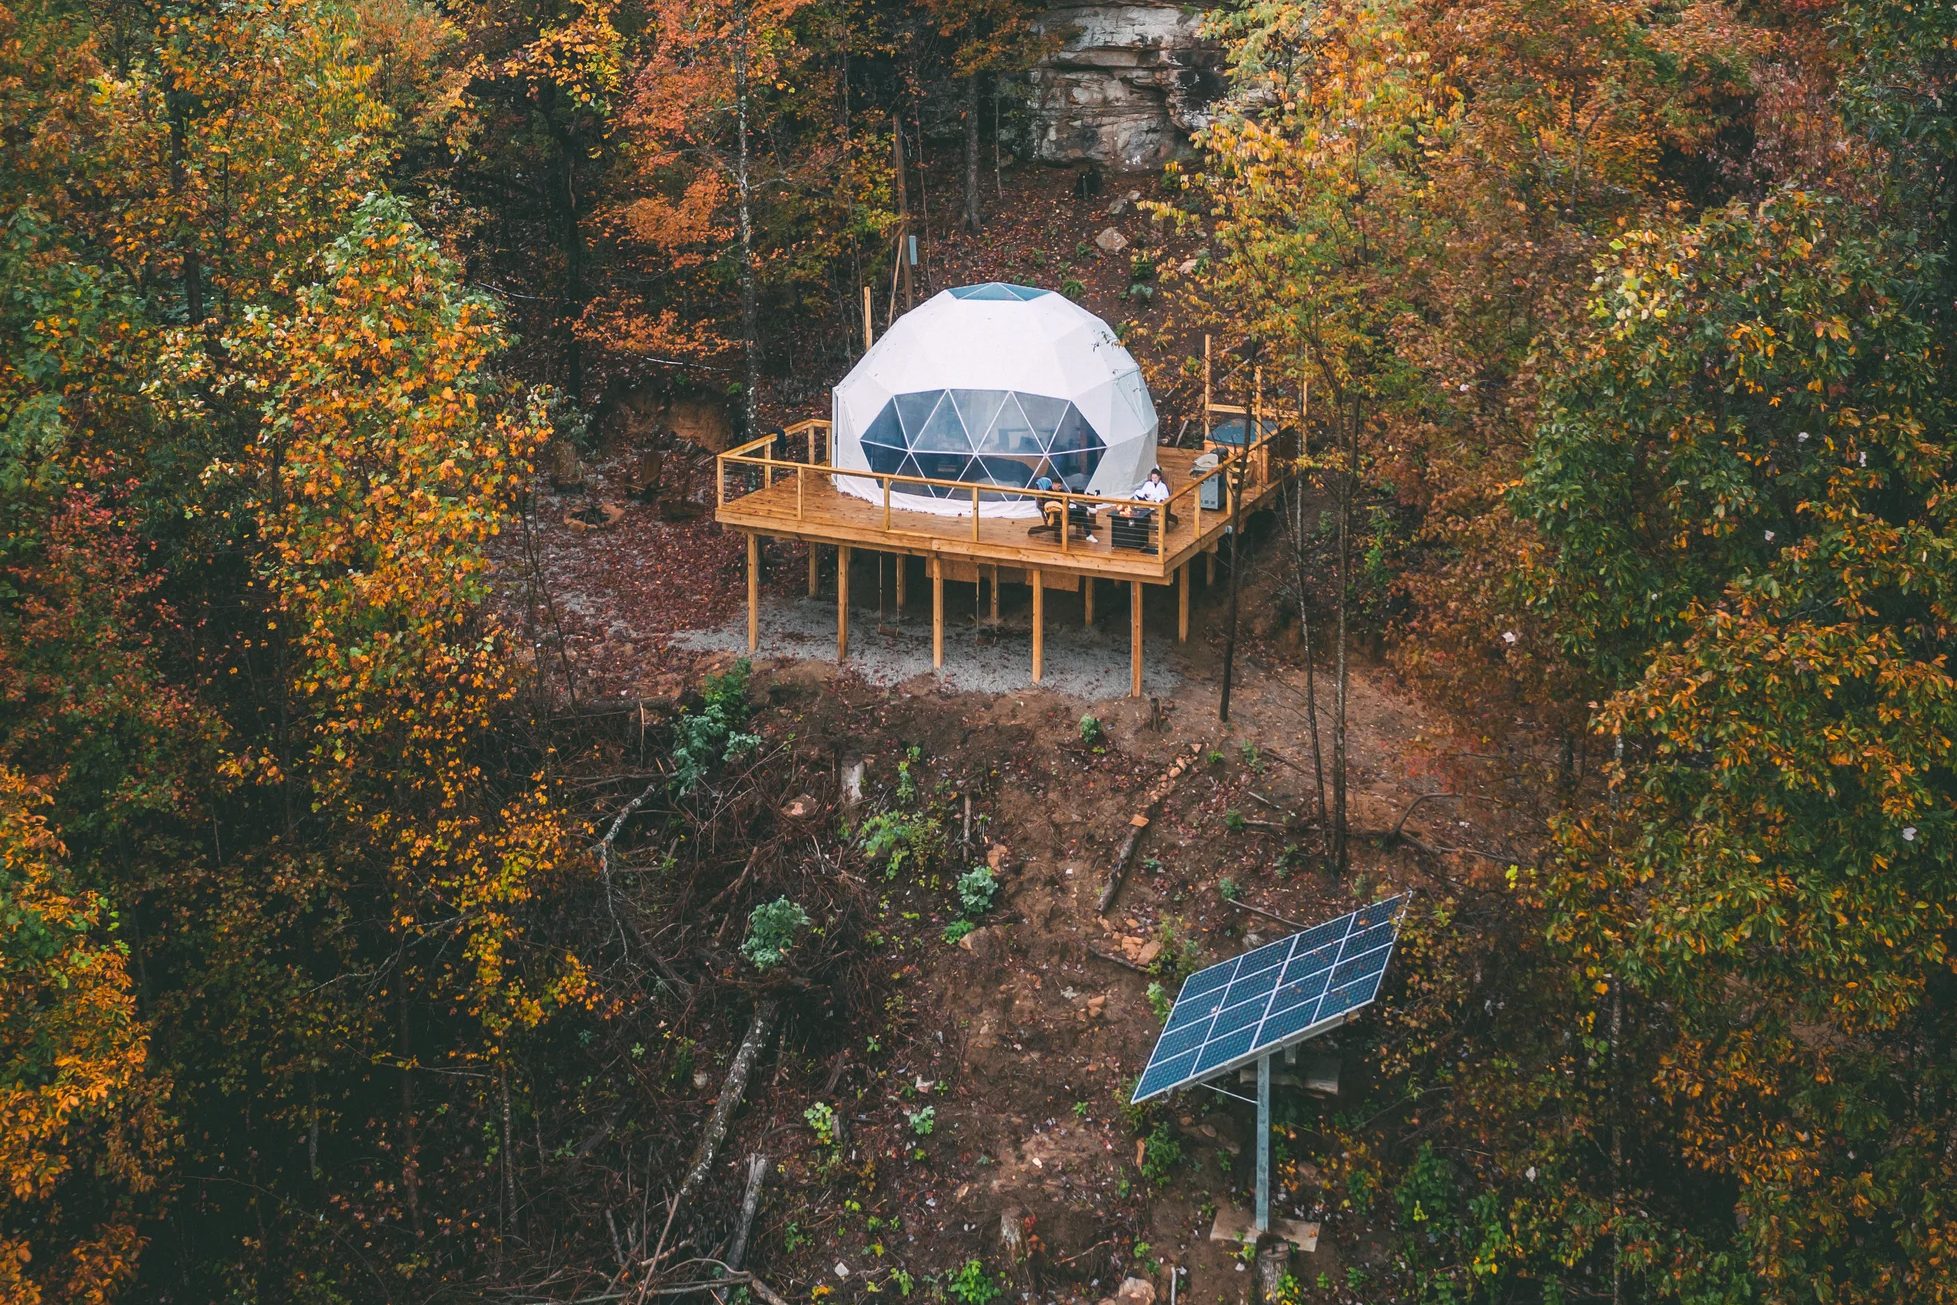 <p>These <a href="https://www.tennessee-glamping.com/?gclid=CjwKCAjwpuajBhBpEiwA_ZtfhYpLweFvOSjIjDuRQwACqTtMg4ItsJ4_o4gxEVN0-hPXnX-V1xopvBoCCjMQAvD_BwE" rel="noopener noreferrer">geodesic glamping domes</a> in the South Cumberland Mountains between Chattanooga and Nashville are chock-full of modern conveniences such as private bathrooms, robes, kitchens with refrigerators and coffeemakers, hot water and propane grills. Stare at the stars or the woods that surround you through clear panes if it's chilly—or you can't be bothered with bugs.</p> <p>You can also play provided board games on the deck near the fire pit or unroll the yoga mats to limber up before heading out to hike Foster Falls or the Fiery Gizzard Trail nearby. Be sure to invest in the <a href="https://www.rd.com/list/best-mens-hiking-boots/" rel="noopener noreferrer">best hiking boots</a> to avoid sore feet. But if you come back from trekking with barking dogs, not to worry: There's a hot tub with your reservation's name written on it.</p> <p class="listicle-page__cta-button-shop"><a class="shop-btn" href="https://www.tennessee-glamping.com/?gclid=CjwKCAjwpuajBhBpEiwA_ZtfhYpLweFvOSjIjDuRQwACqTtMg4ItsJ4_o4gxEVN0-hPXnX-V1xopvBoCCjMQAvD_BwE">Book Now</a></p>